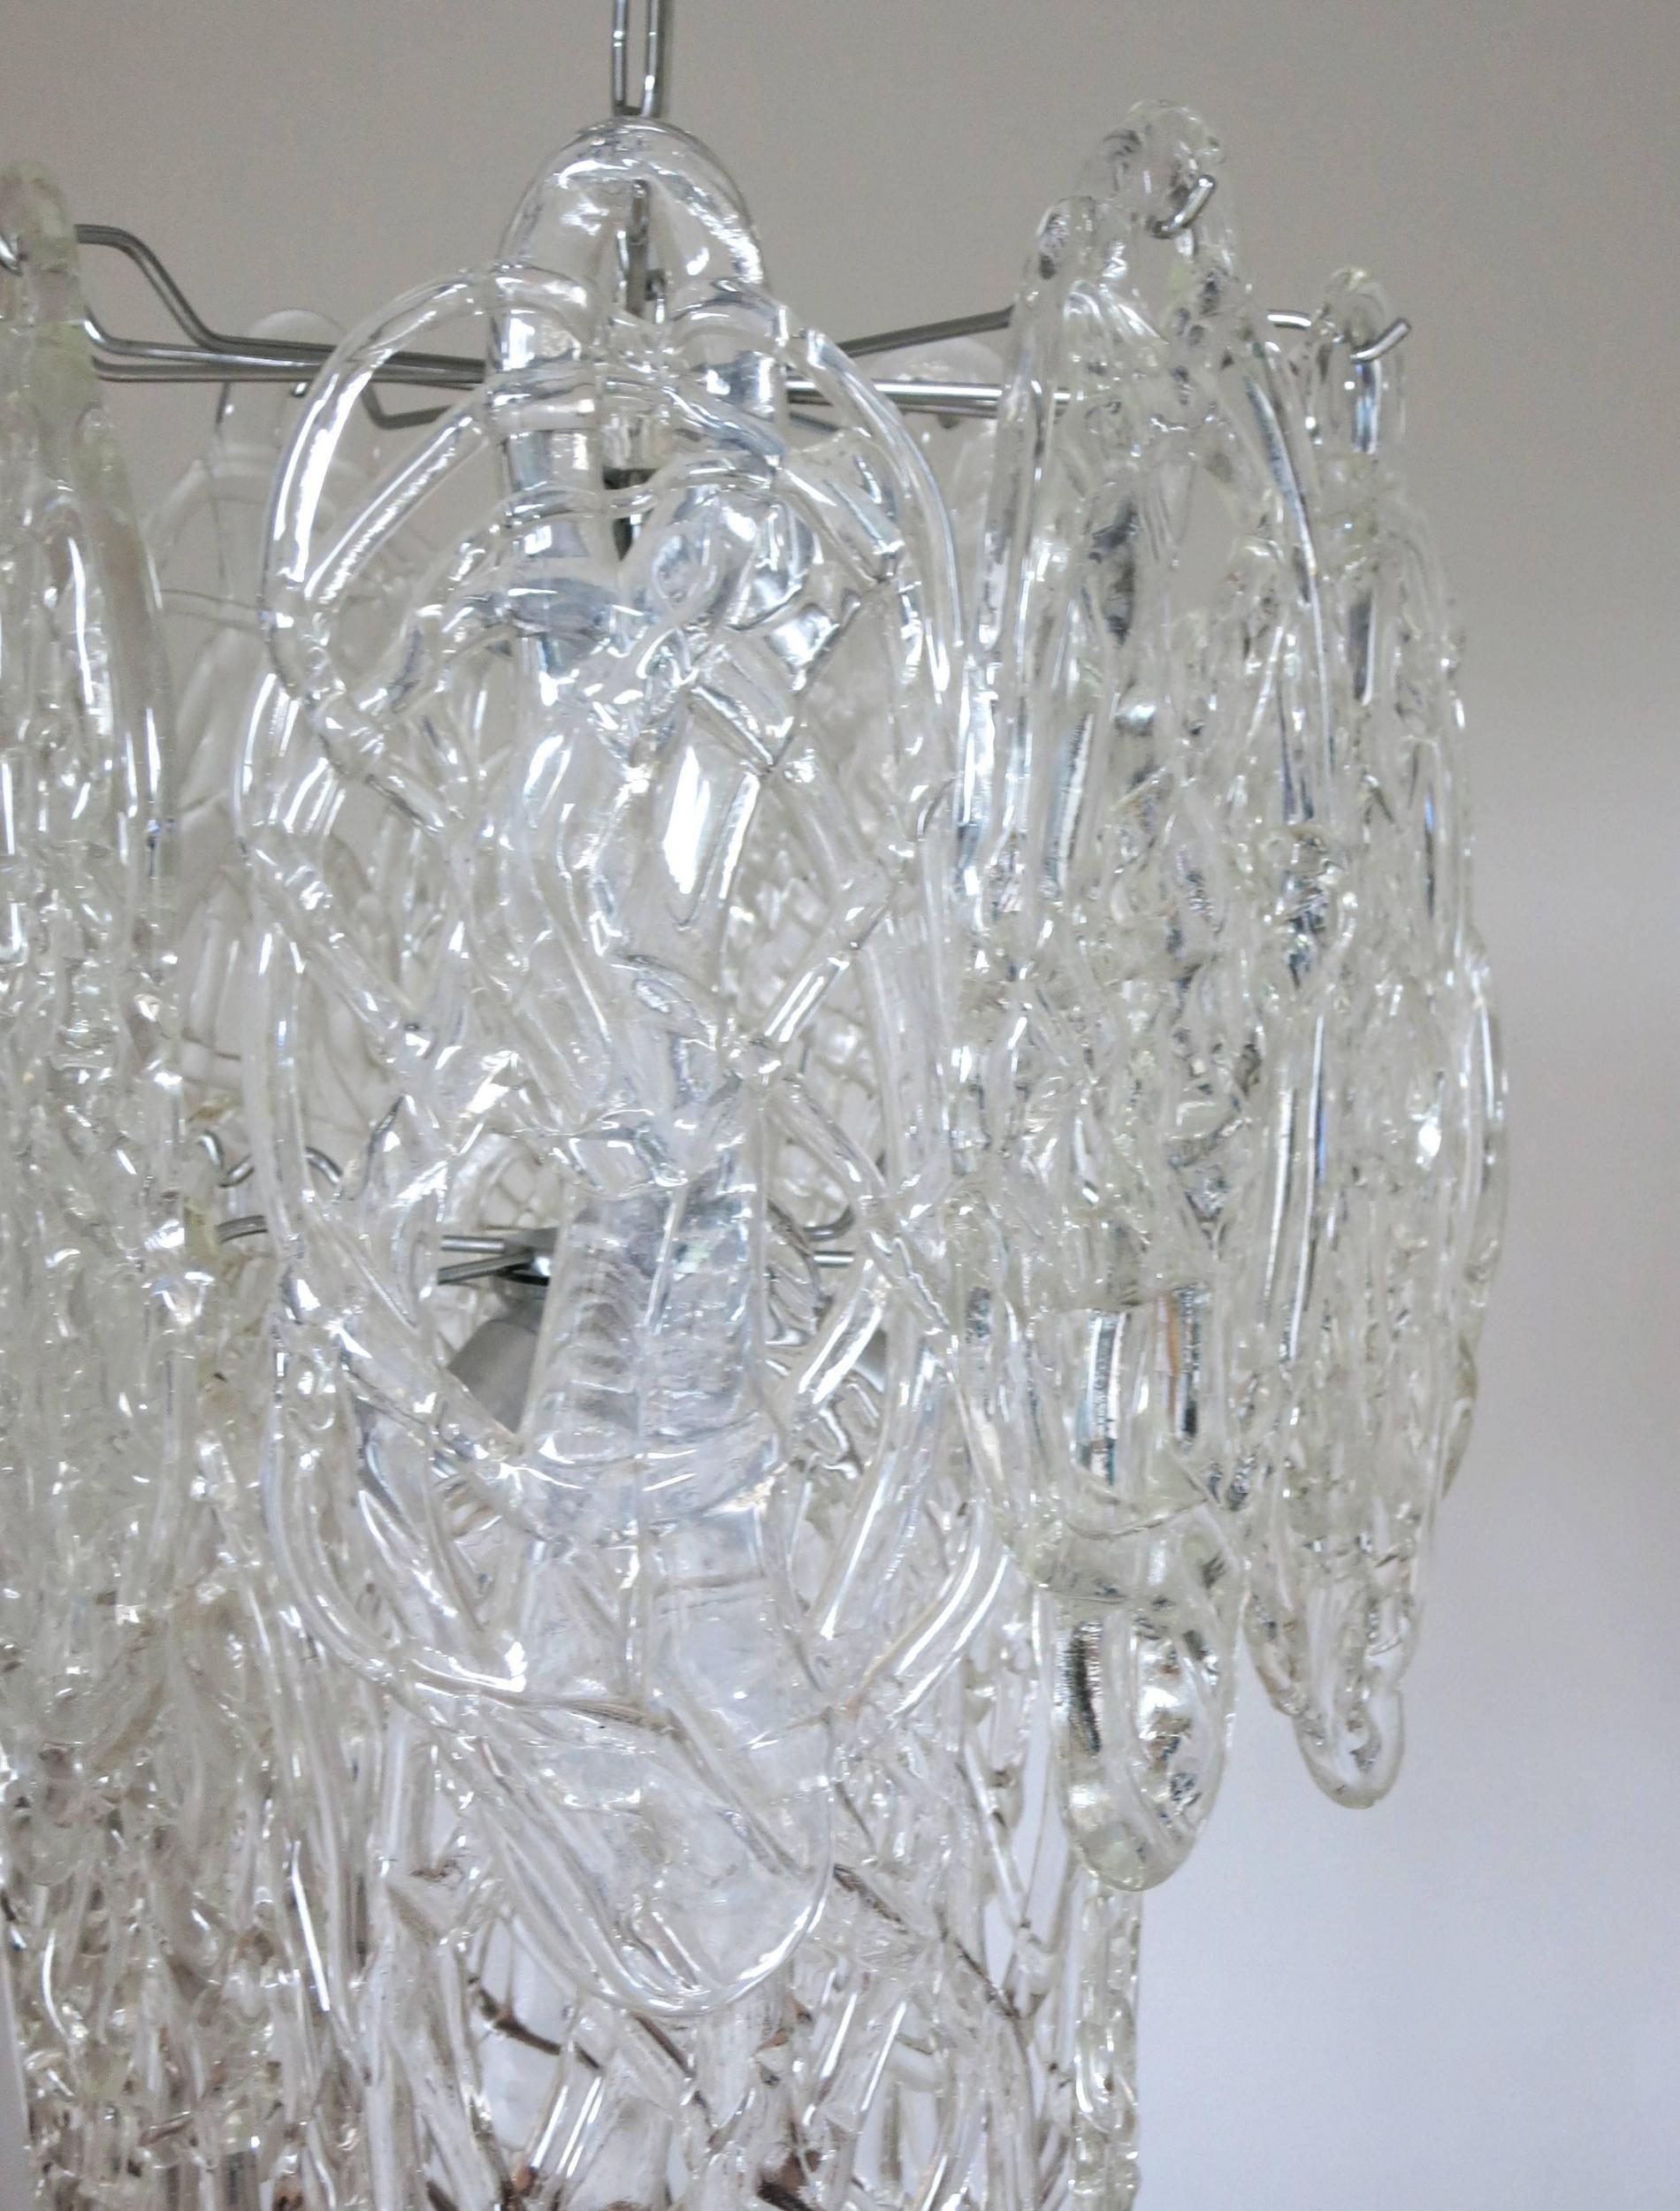 Original vintage Italian chandelier w/ clear murano glass blown in intricate cobweb-like pattern, mounted on chrome metal frame. Designed by Vistosi circa 1960’s.